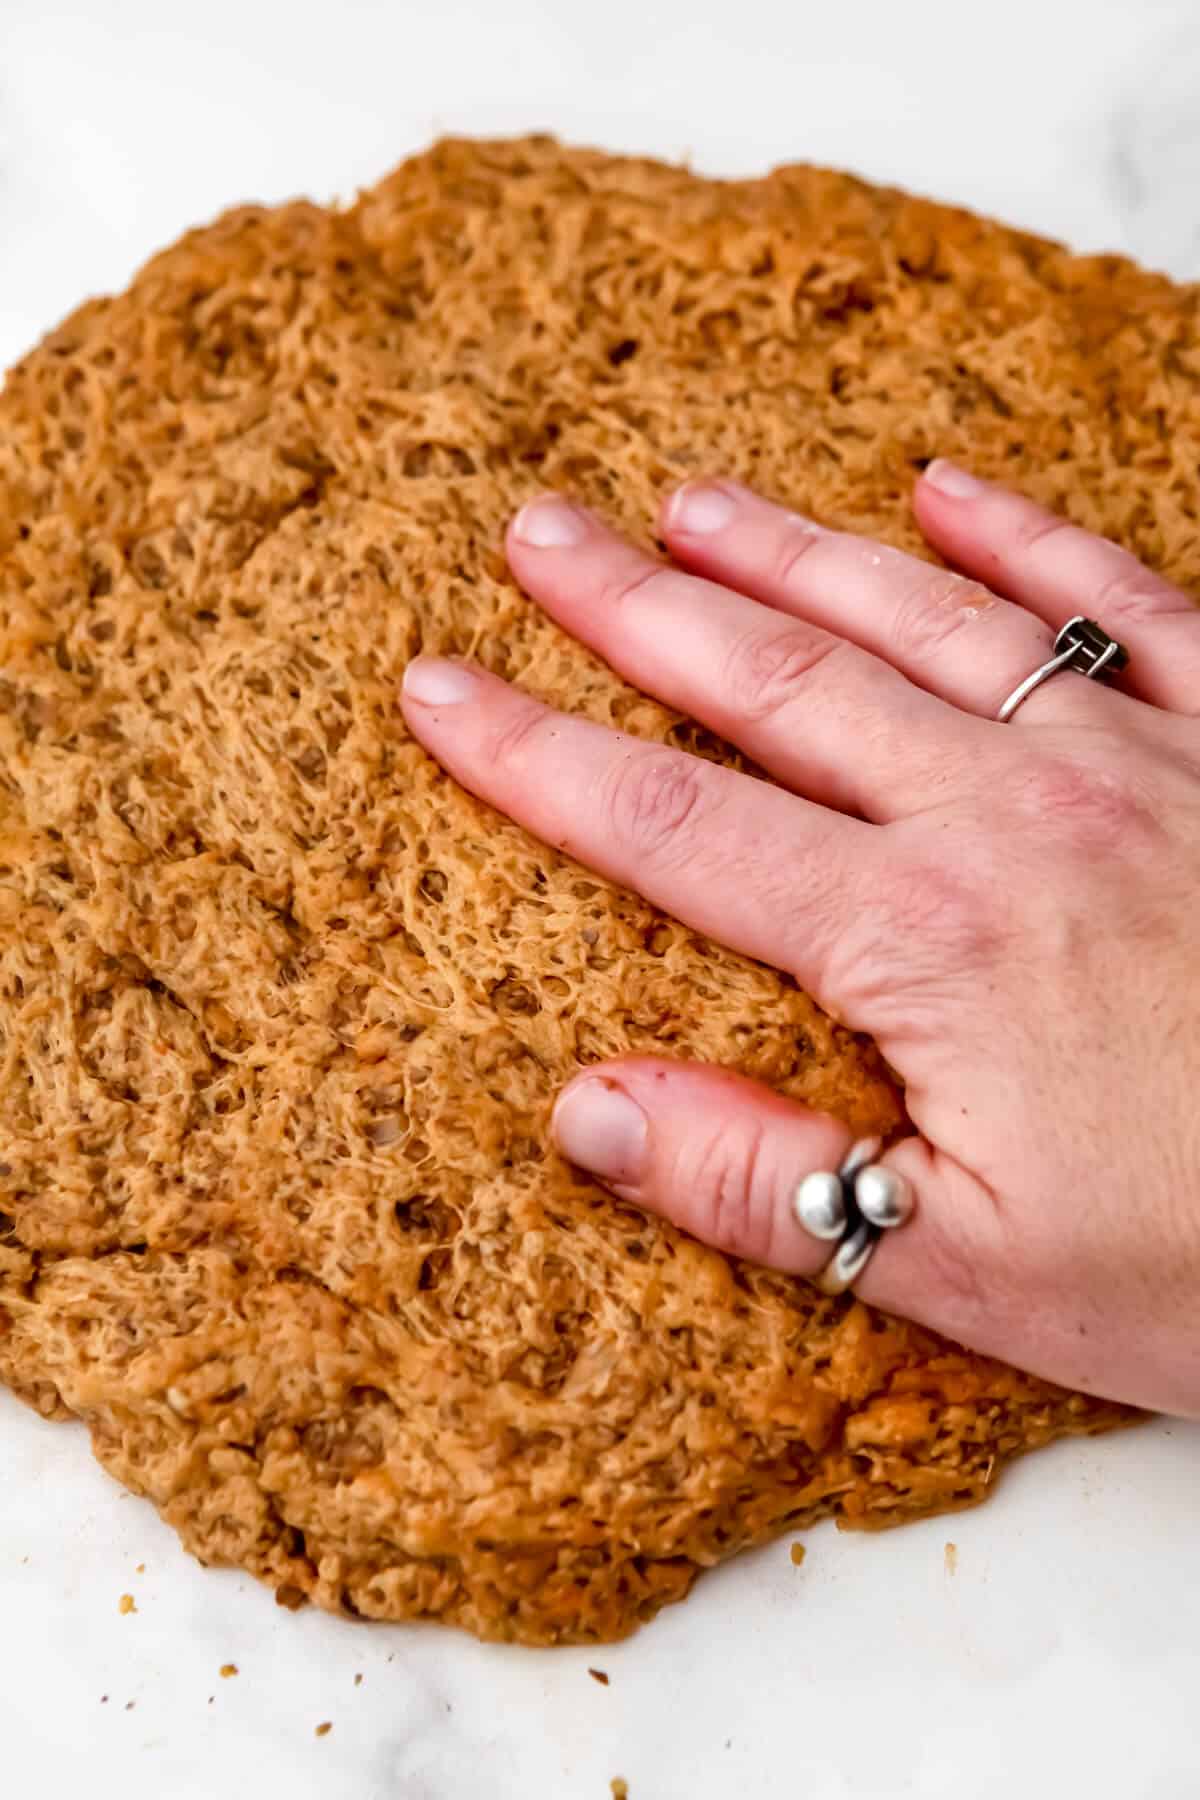 A large flattened round piece of seitan dough before it has been cooked.